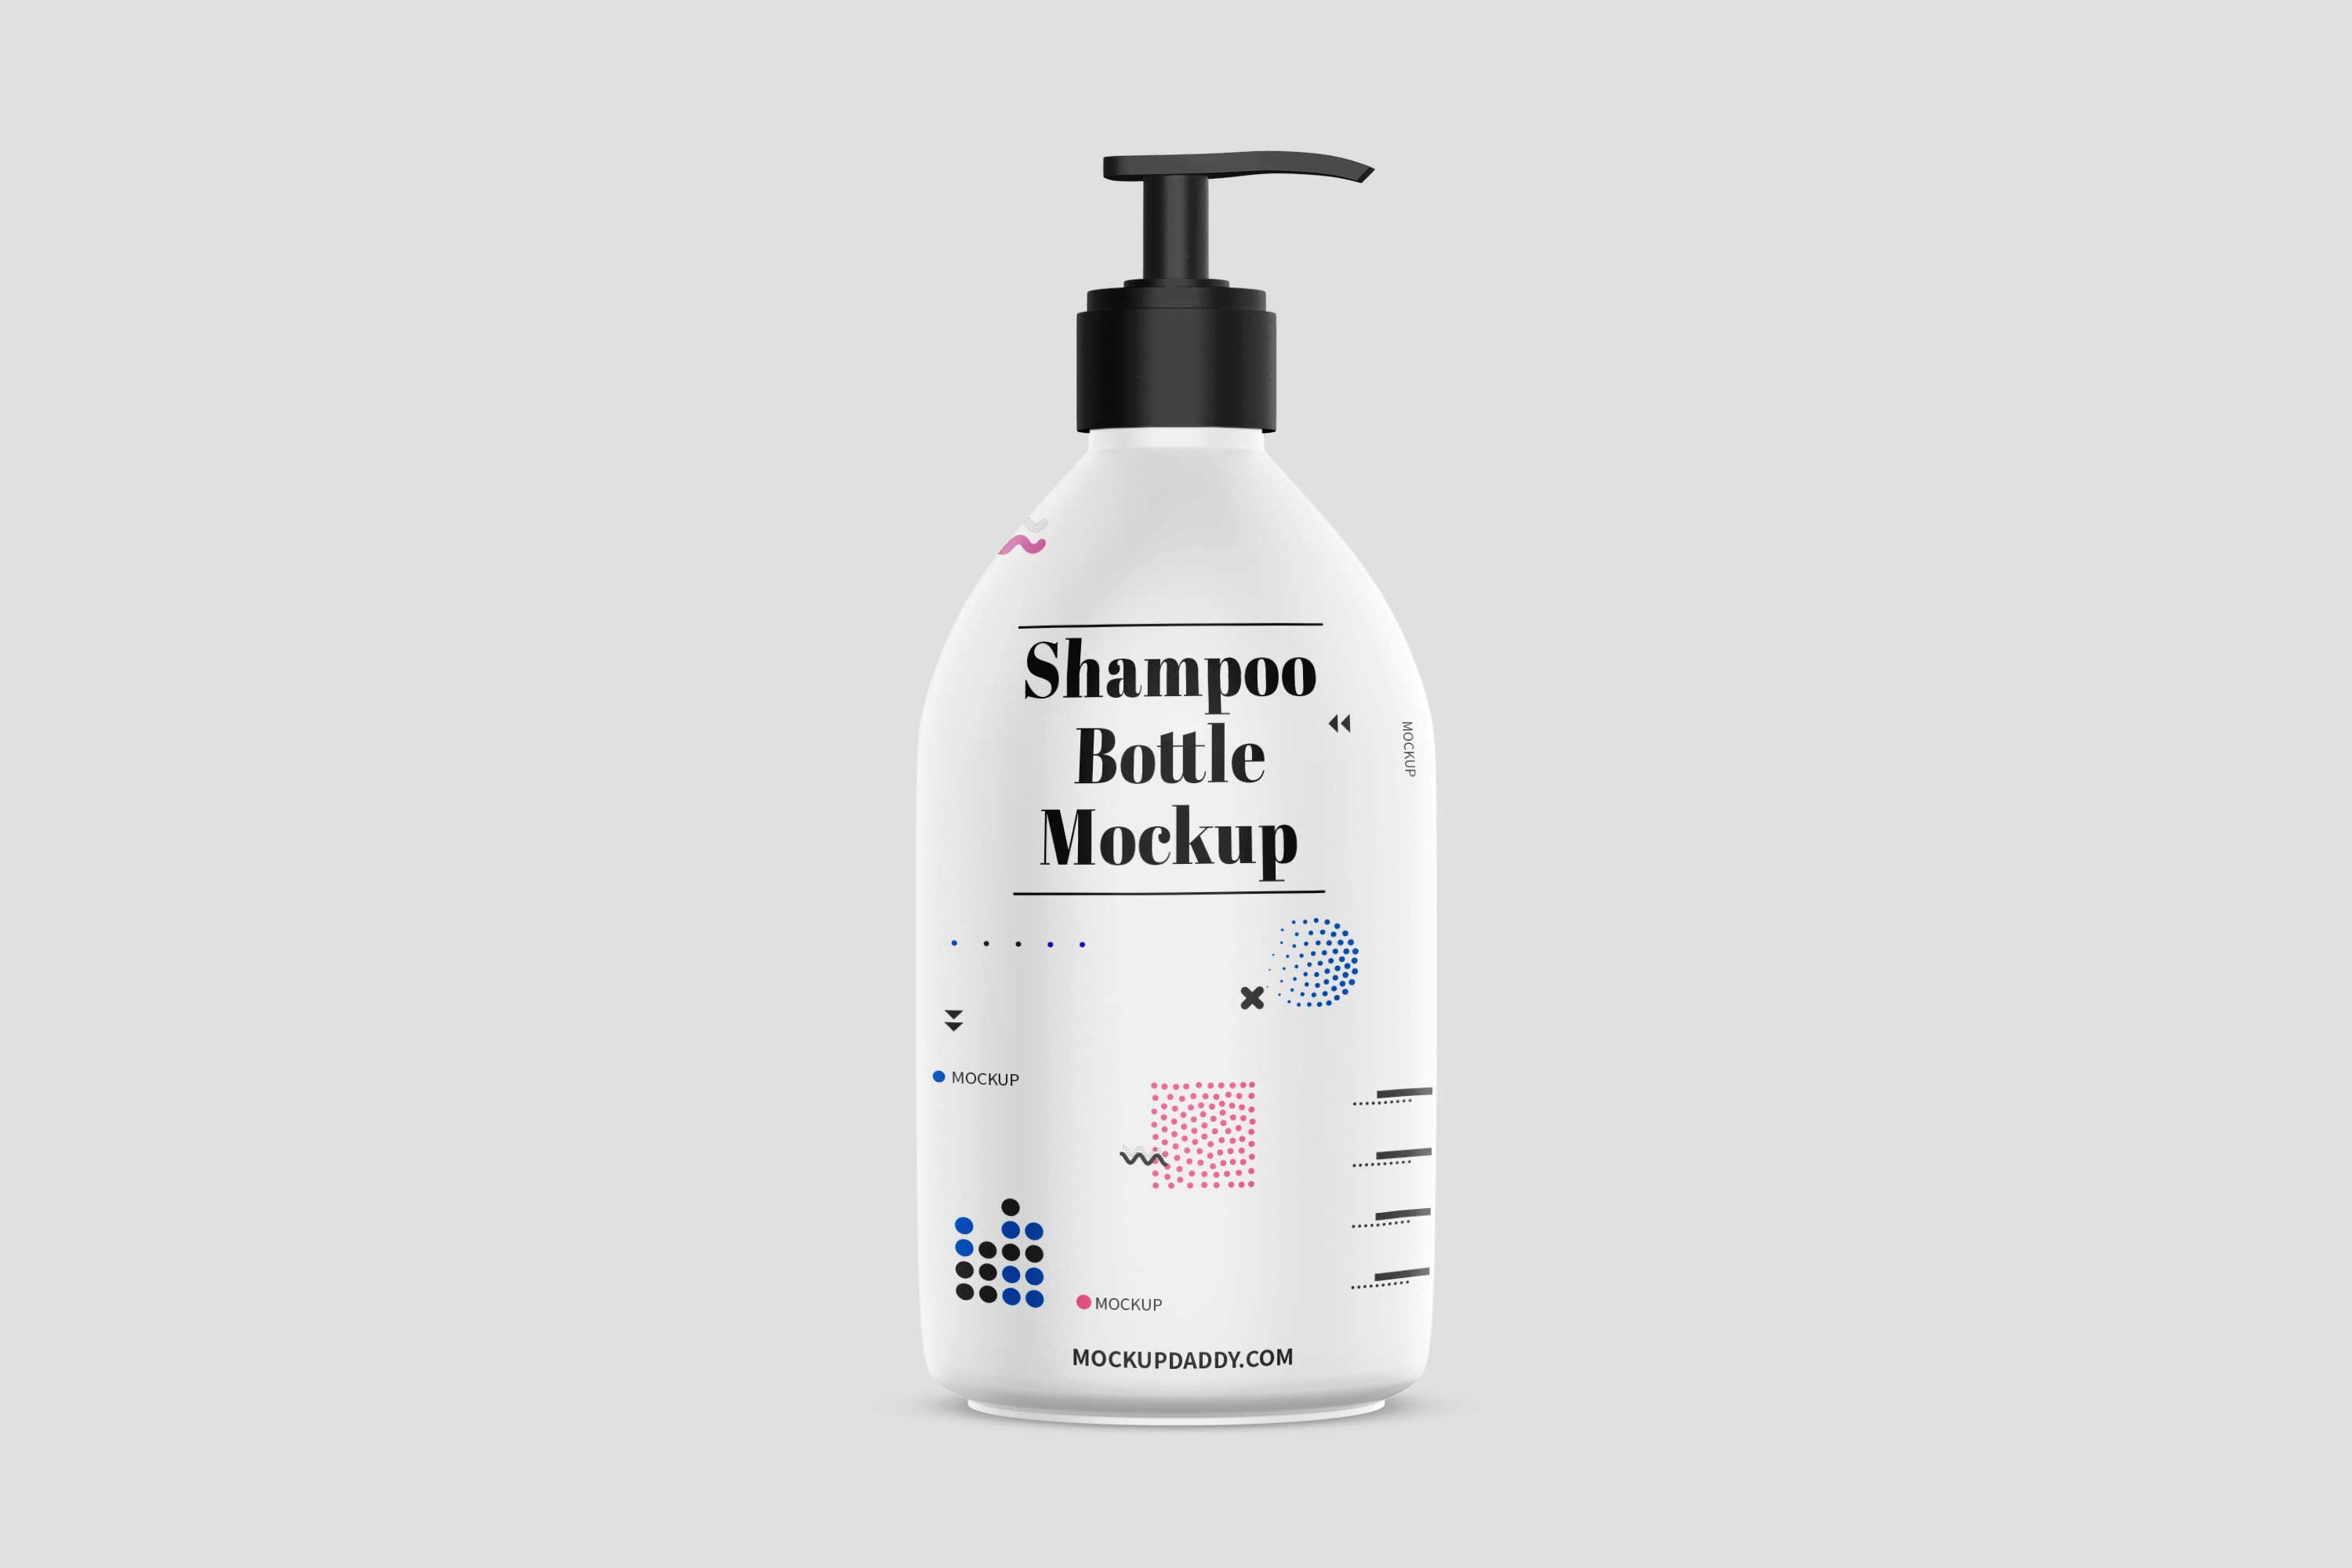 White Shampoo Bottle Mockup with black text and pump